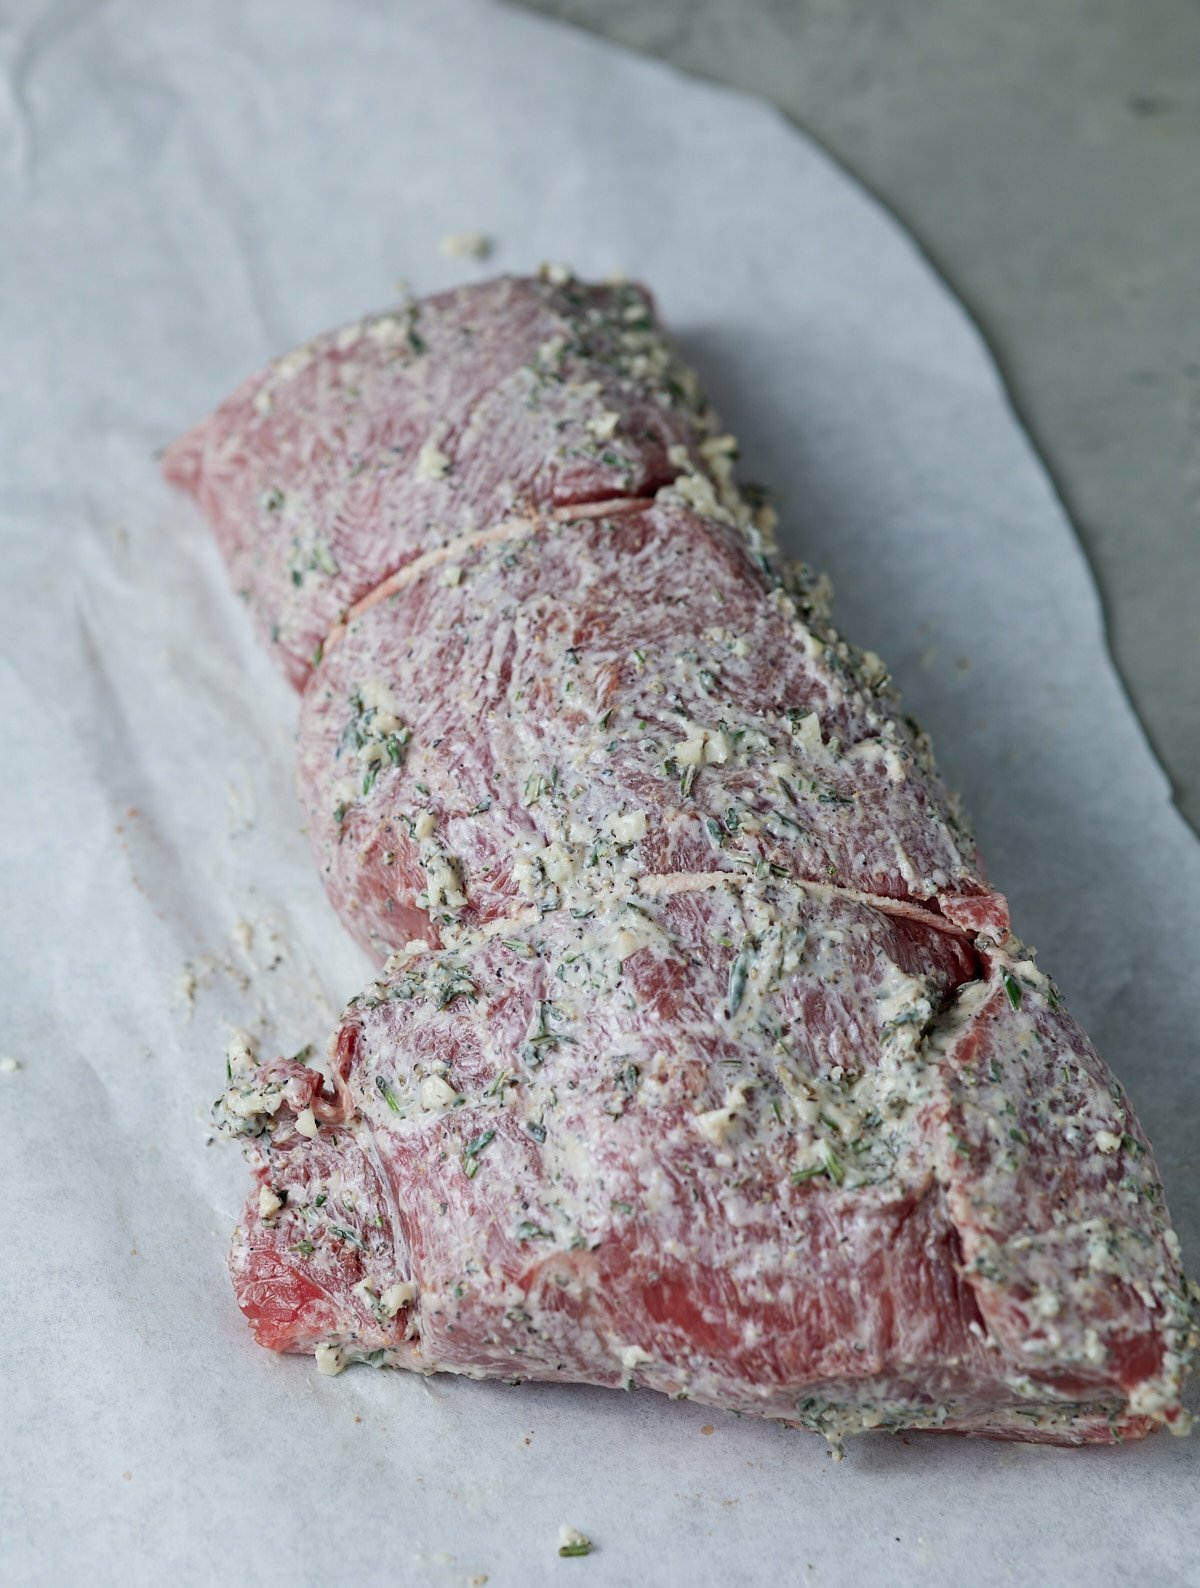 Beef tenderloin rubbed with the mayonnaise and herb mixture.